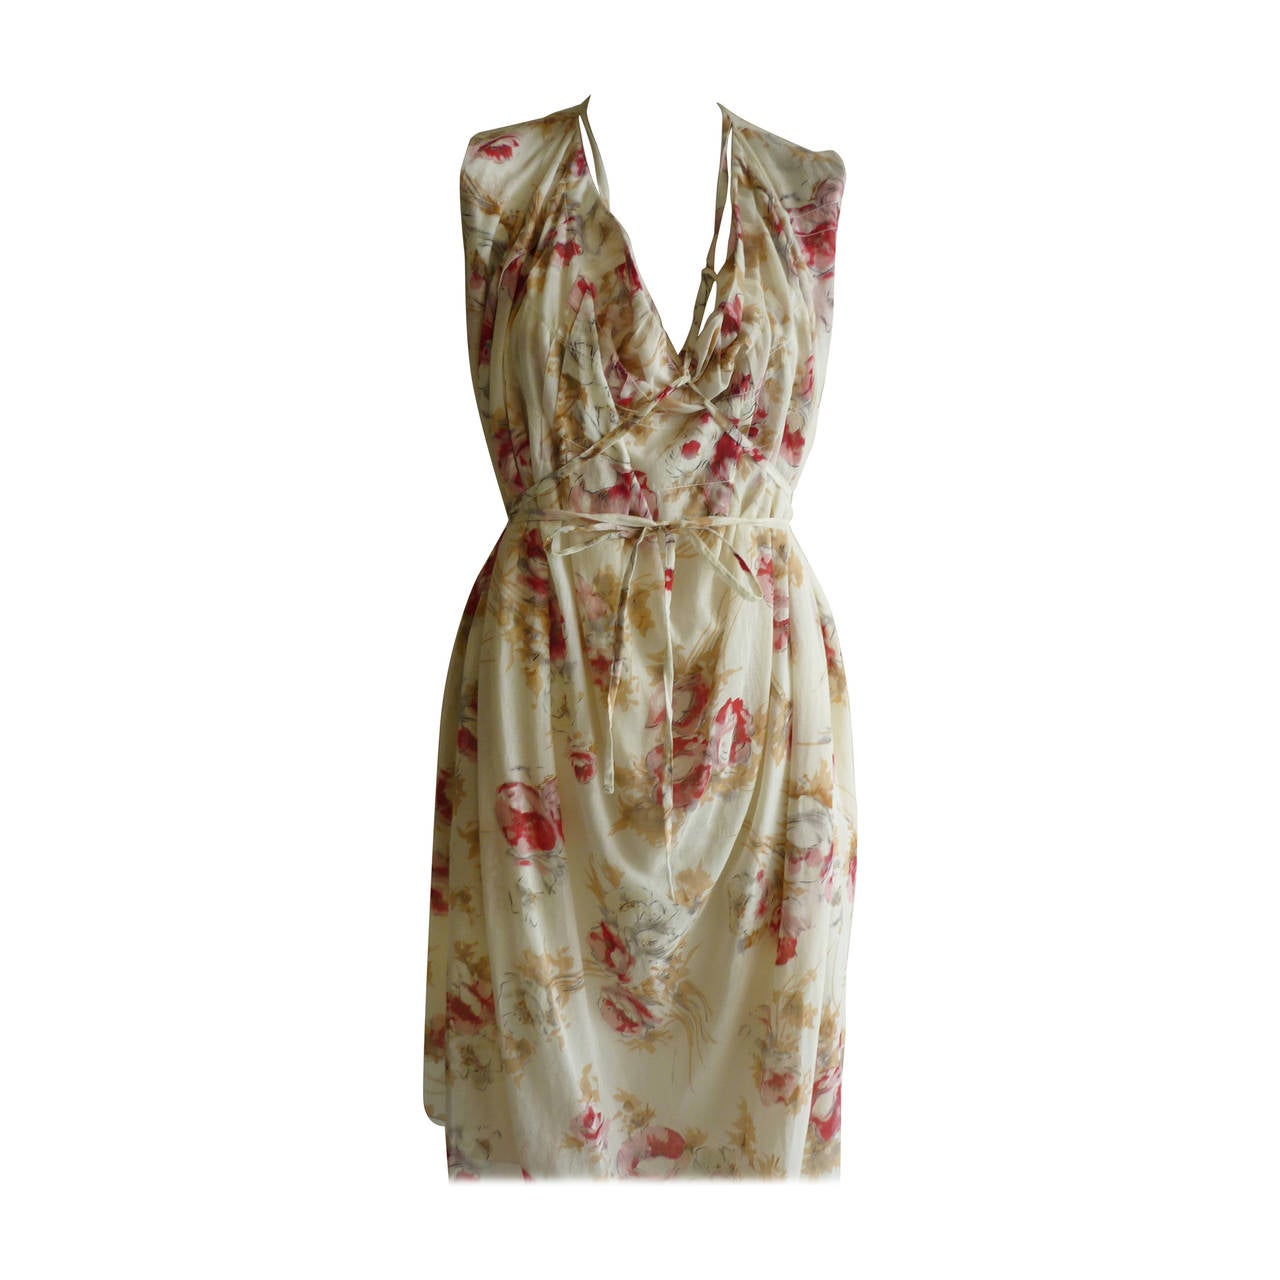 MARNI Winter Edition 2010 Floral Cotton Dress (42 Itl) For Sale